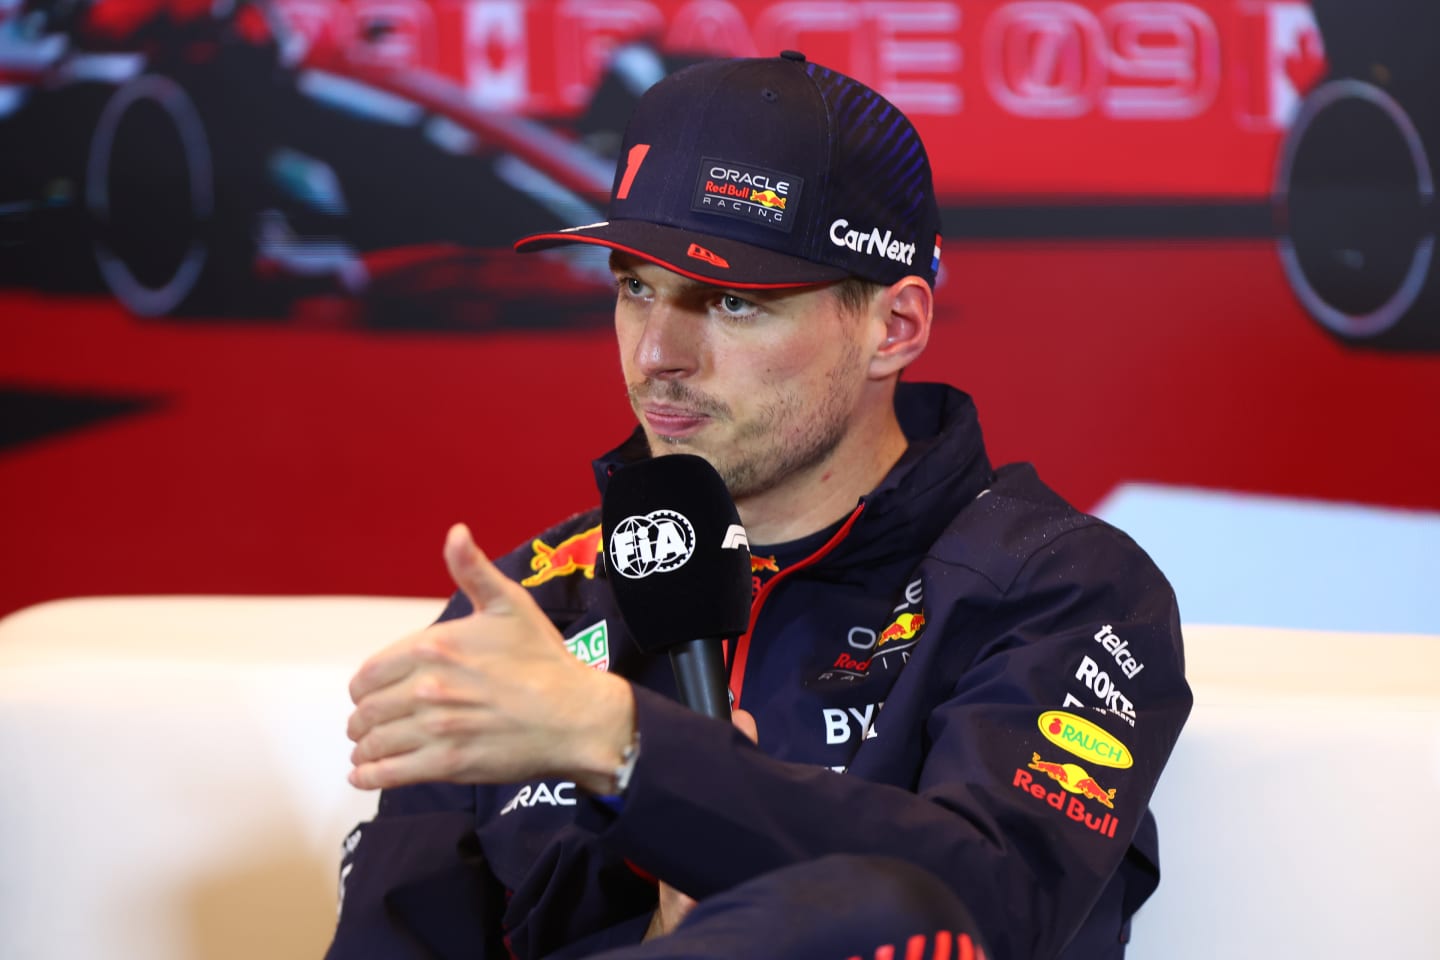 MONTREAL, QUEBEC - JUNE 17: Pole position qualifier Max Verstappen of the Netherlands and Oracle Red Bull Racing attends the press conference after qualifying ahead of the F1 Grand Prix of Canada at Circuit Gilles Villeneuve on June 17, 2023 in Montreal, Quebec. (Photo by Dan Istitene/Getty Images)